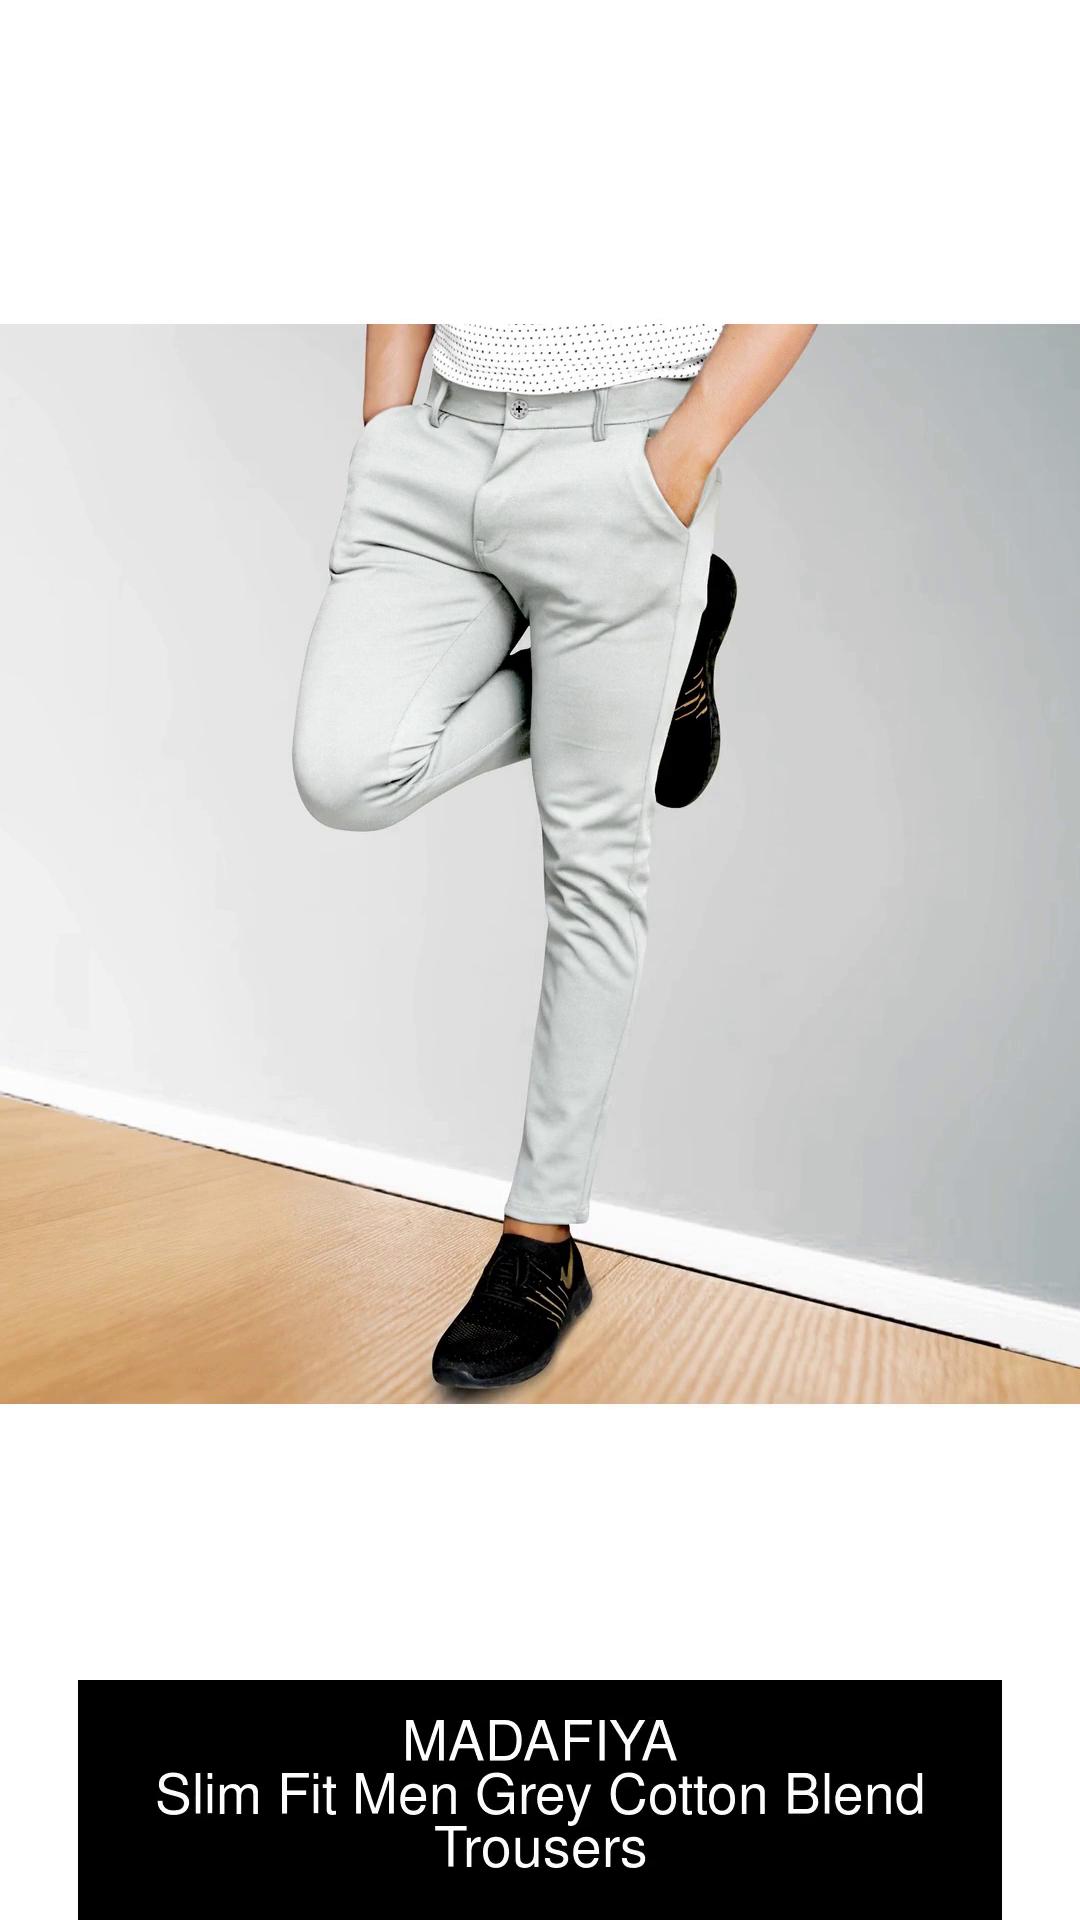 Buy online Grey Cotton Cigarette Pants Trousers from bottom wear for Women  by Showoff for 859 at 63 off  2023 Limeroadcom